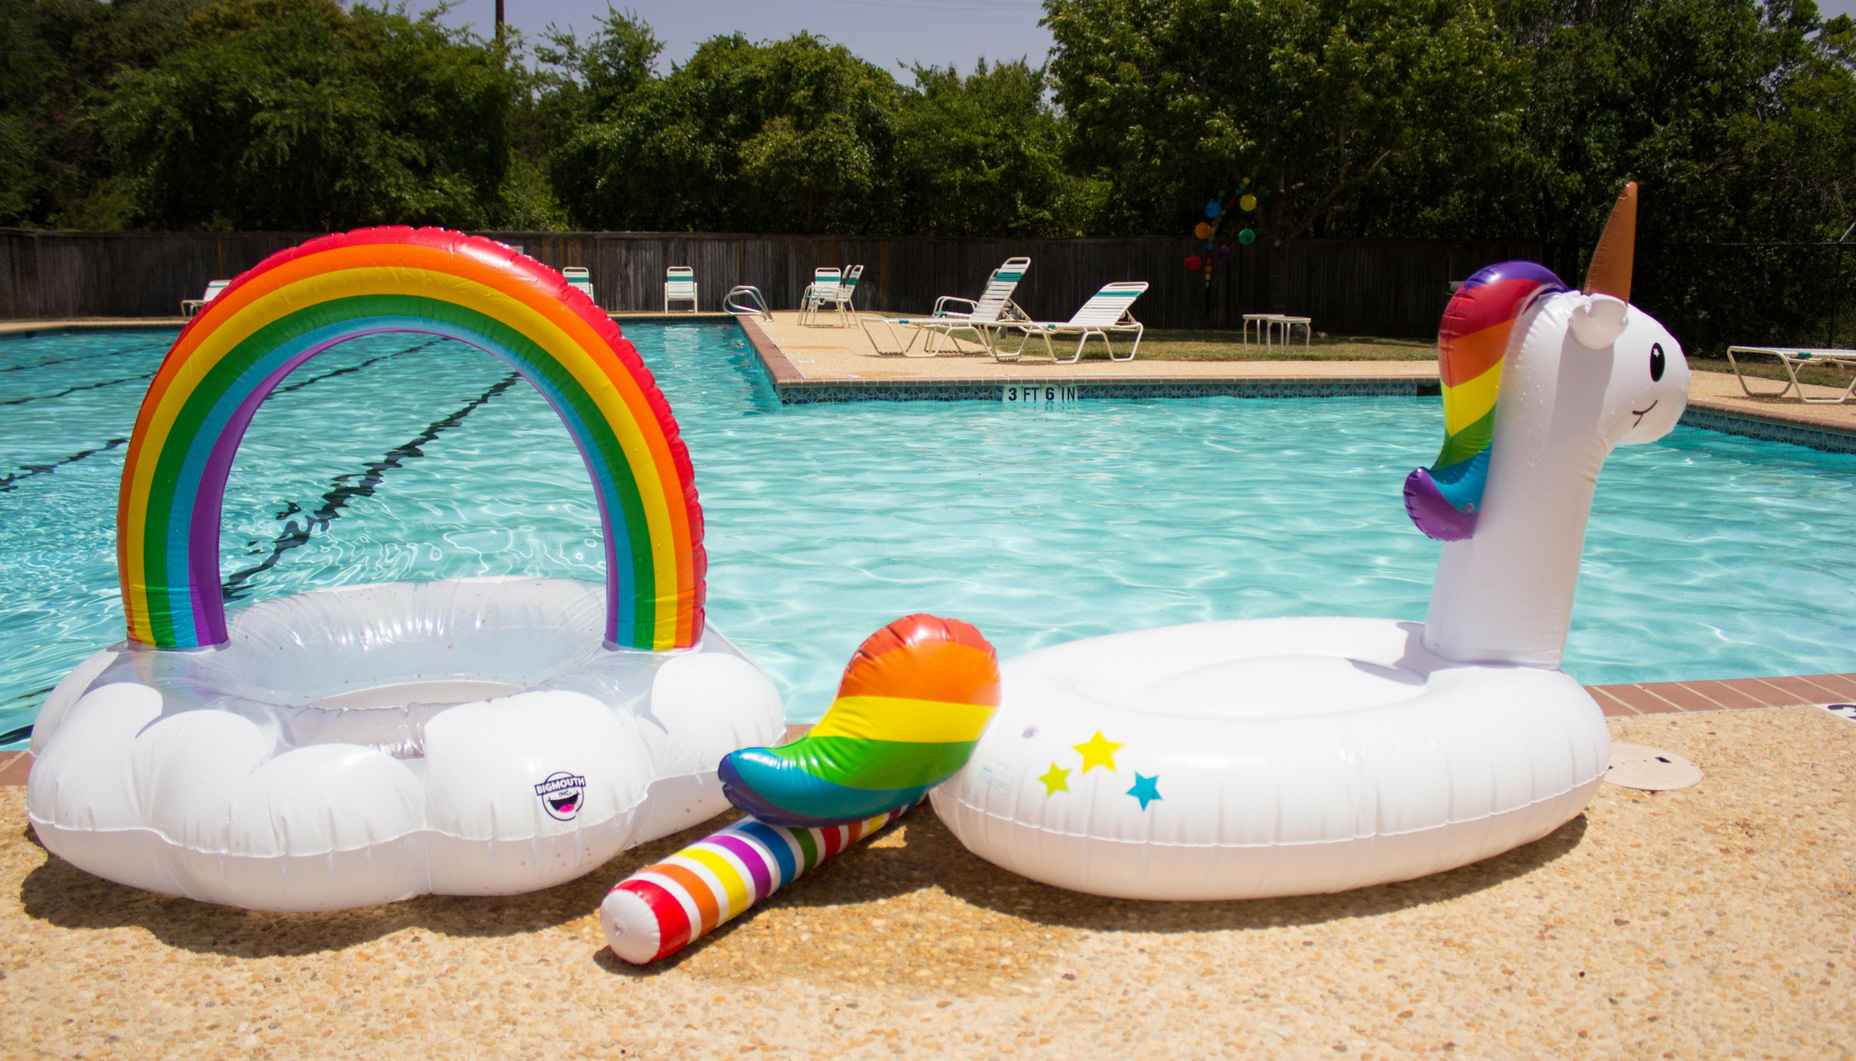 Rainbow Color Unicorn Fun Kids Swim Party Toy Non-toxic and Tasteless Inflatable Floating Row Inflatable Pool Float Summer Pool Raft Inflatable Pool Toys Outdoor Water Lounge,White,265x220x165cm